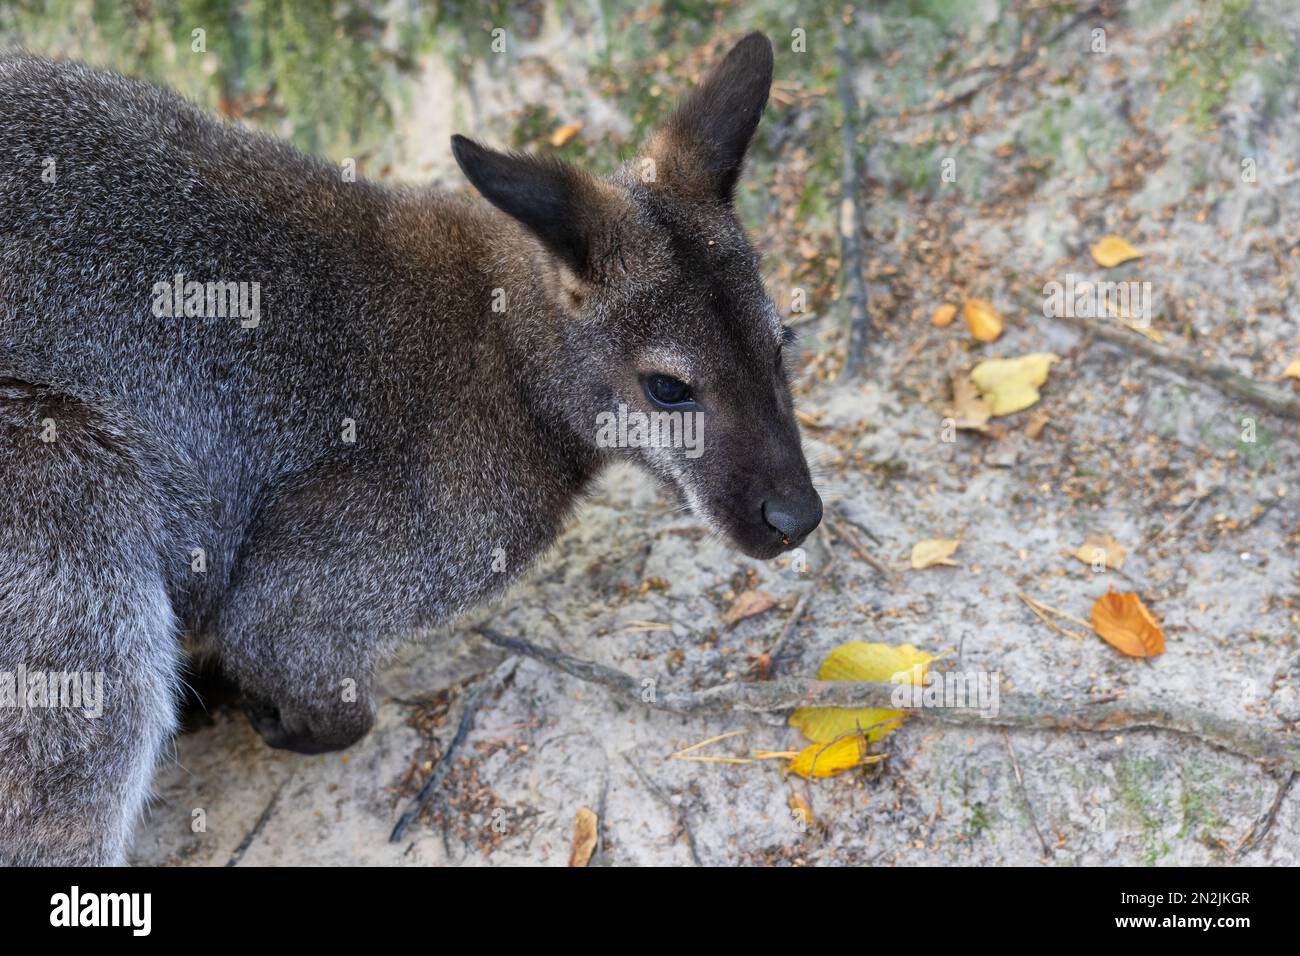 The red-necked wallaby (Notamacropus rufogriseus) macropod marsupial, other names: Bennett's Wallaby, Brush Wallaby, Brush Kangaroo or Red Wallaby, an Stock Photo